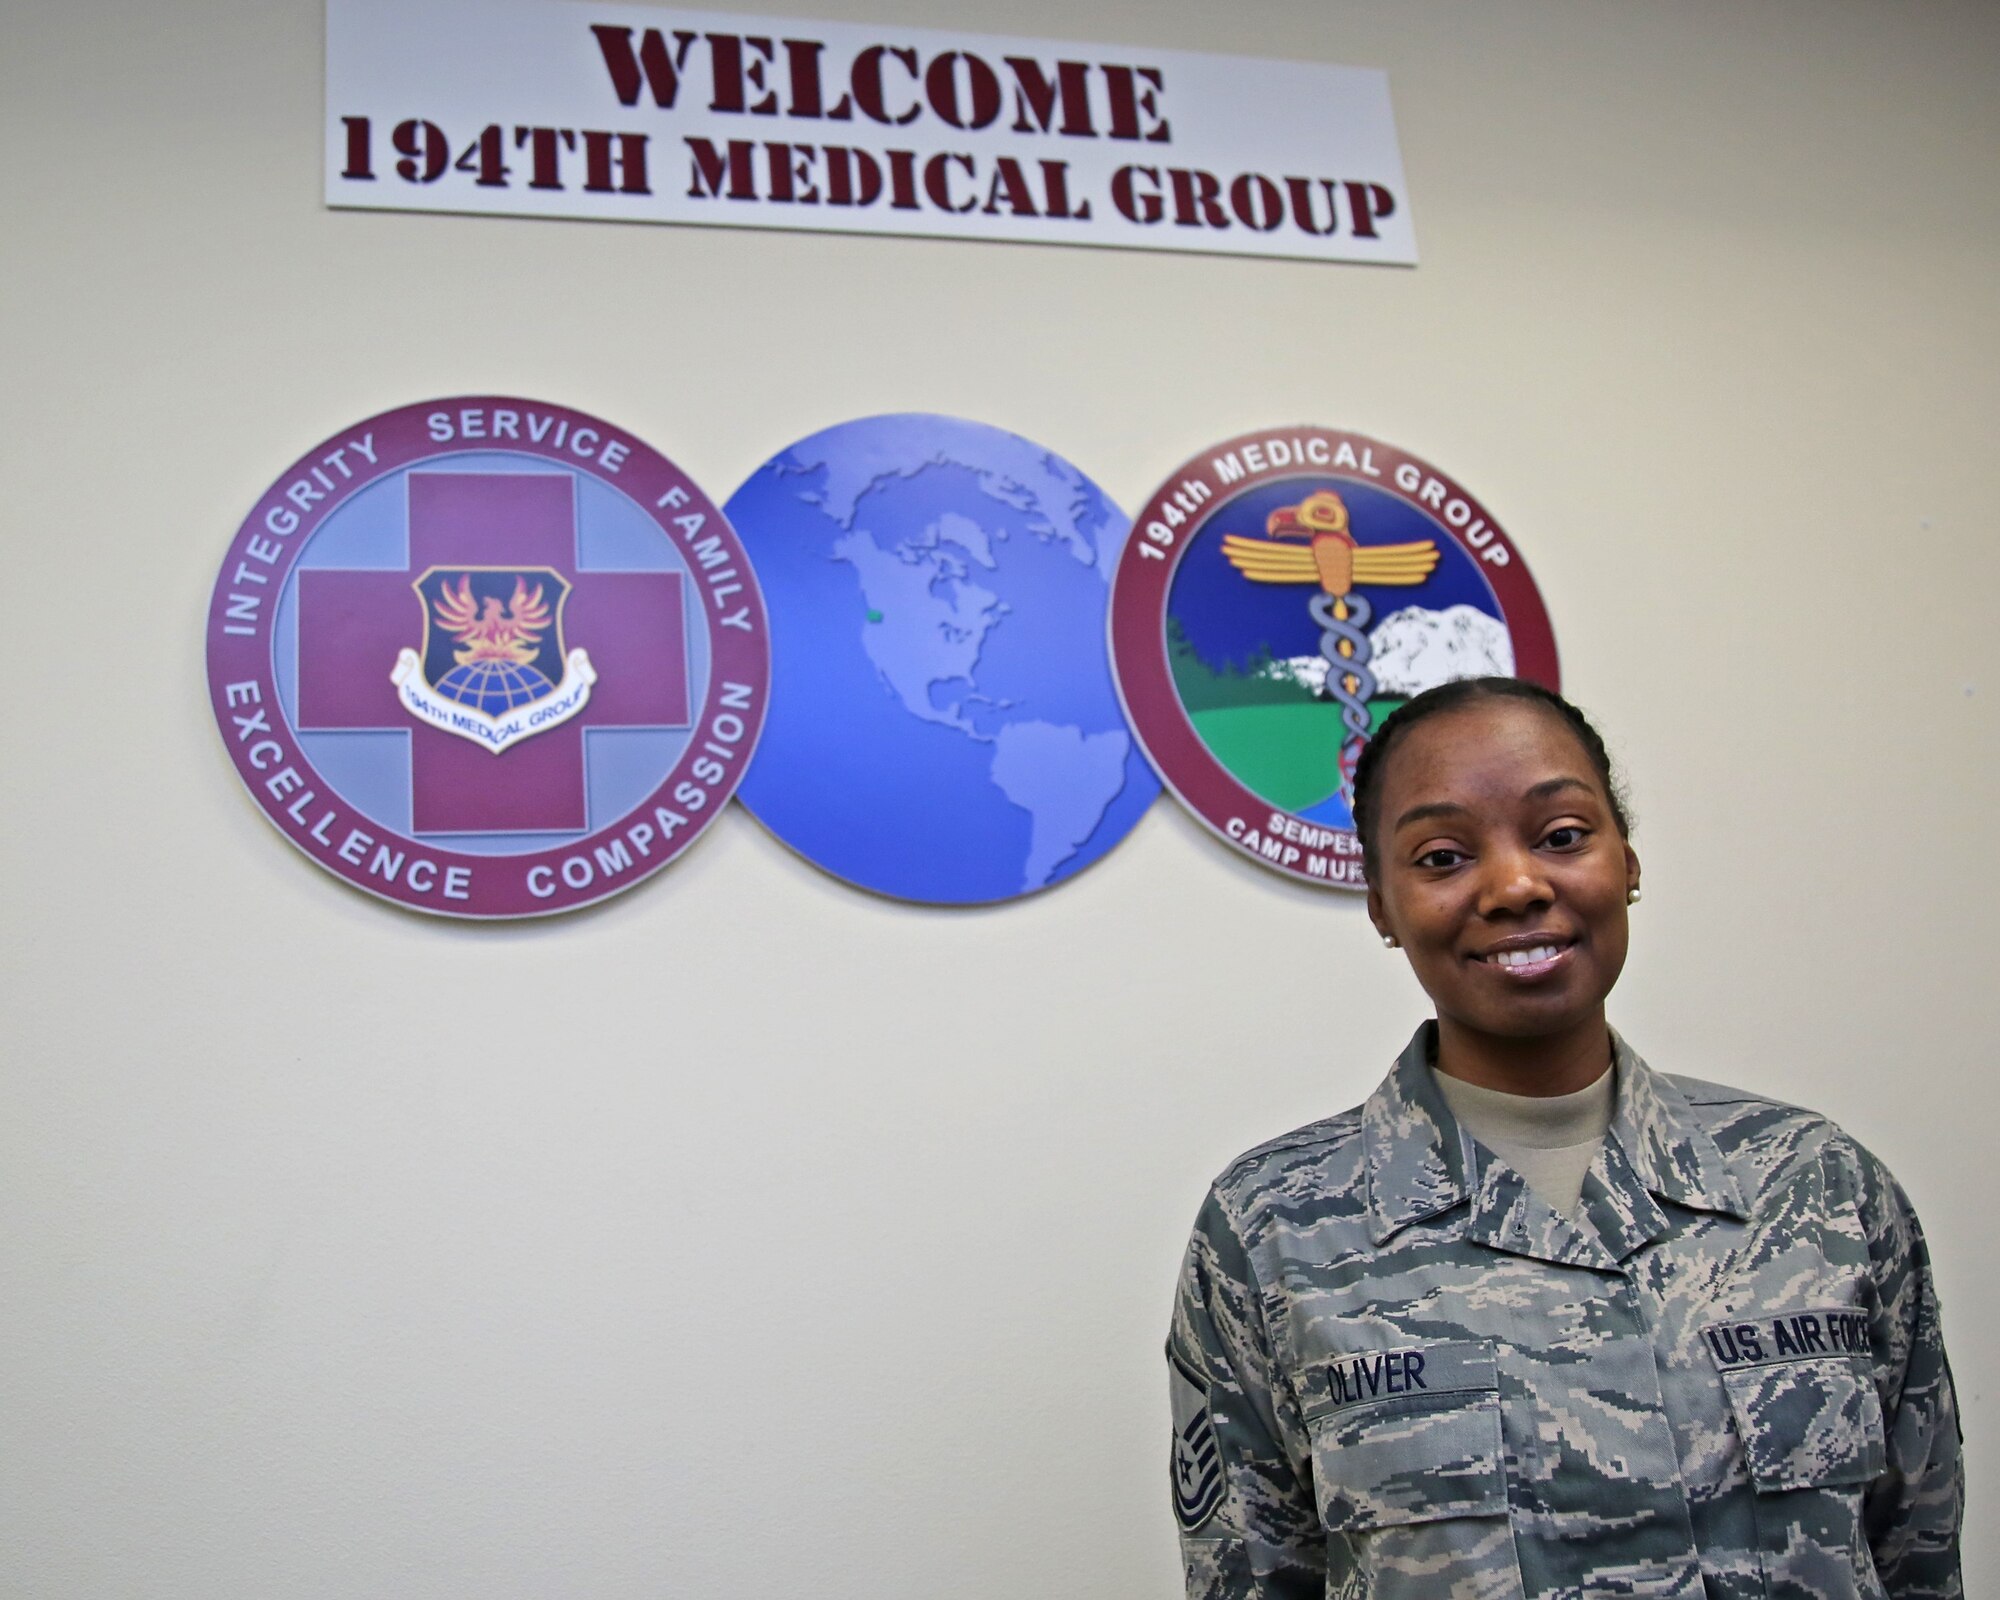 Master Sgt. Khalilah Oliver, a medical administrator assigned to the Washington Air National Guard's 194th Medical Group, stands in a reception area, Nov. 4, 2018. (U.S. Air Force photo by Airman 1st Class Mckenzie Airhar)